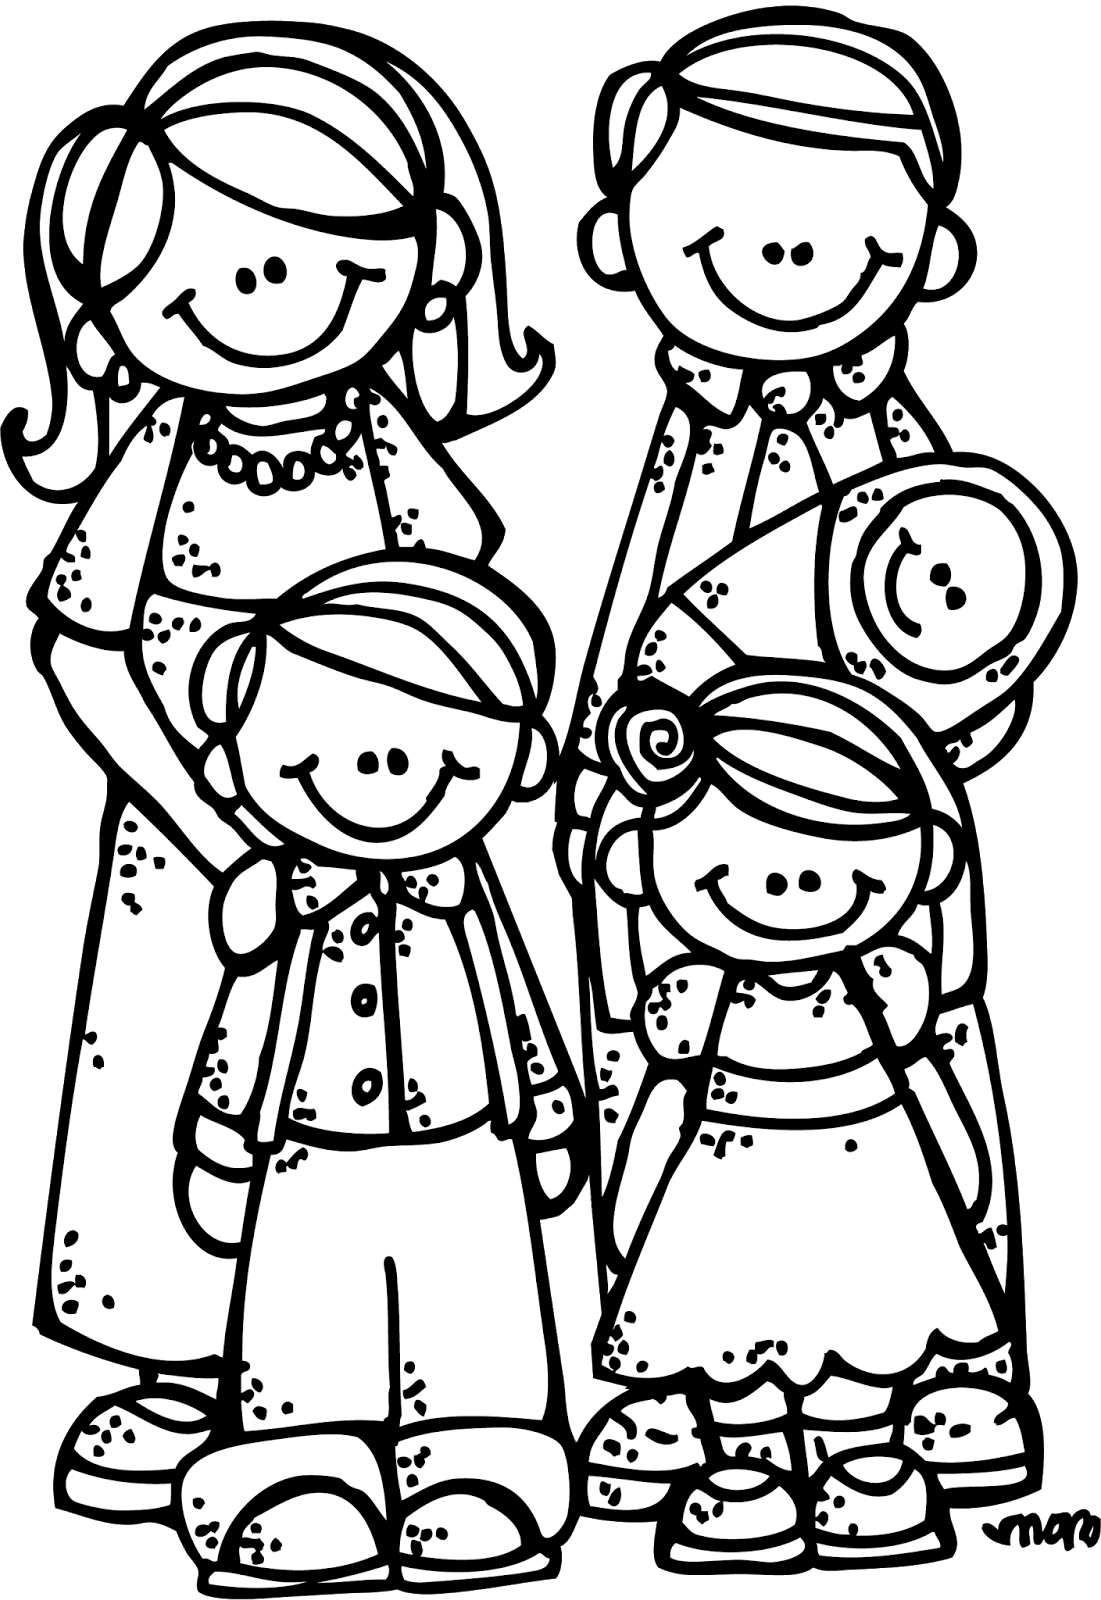 germs clipart black and white